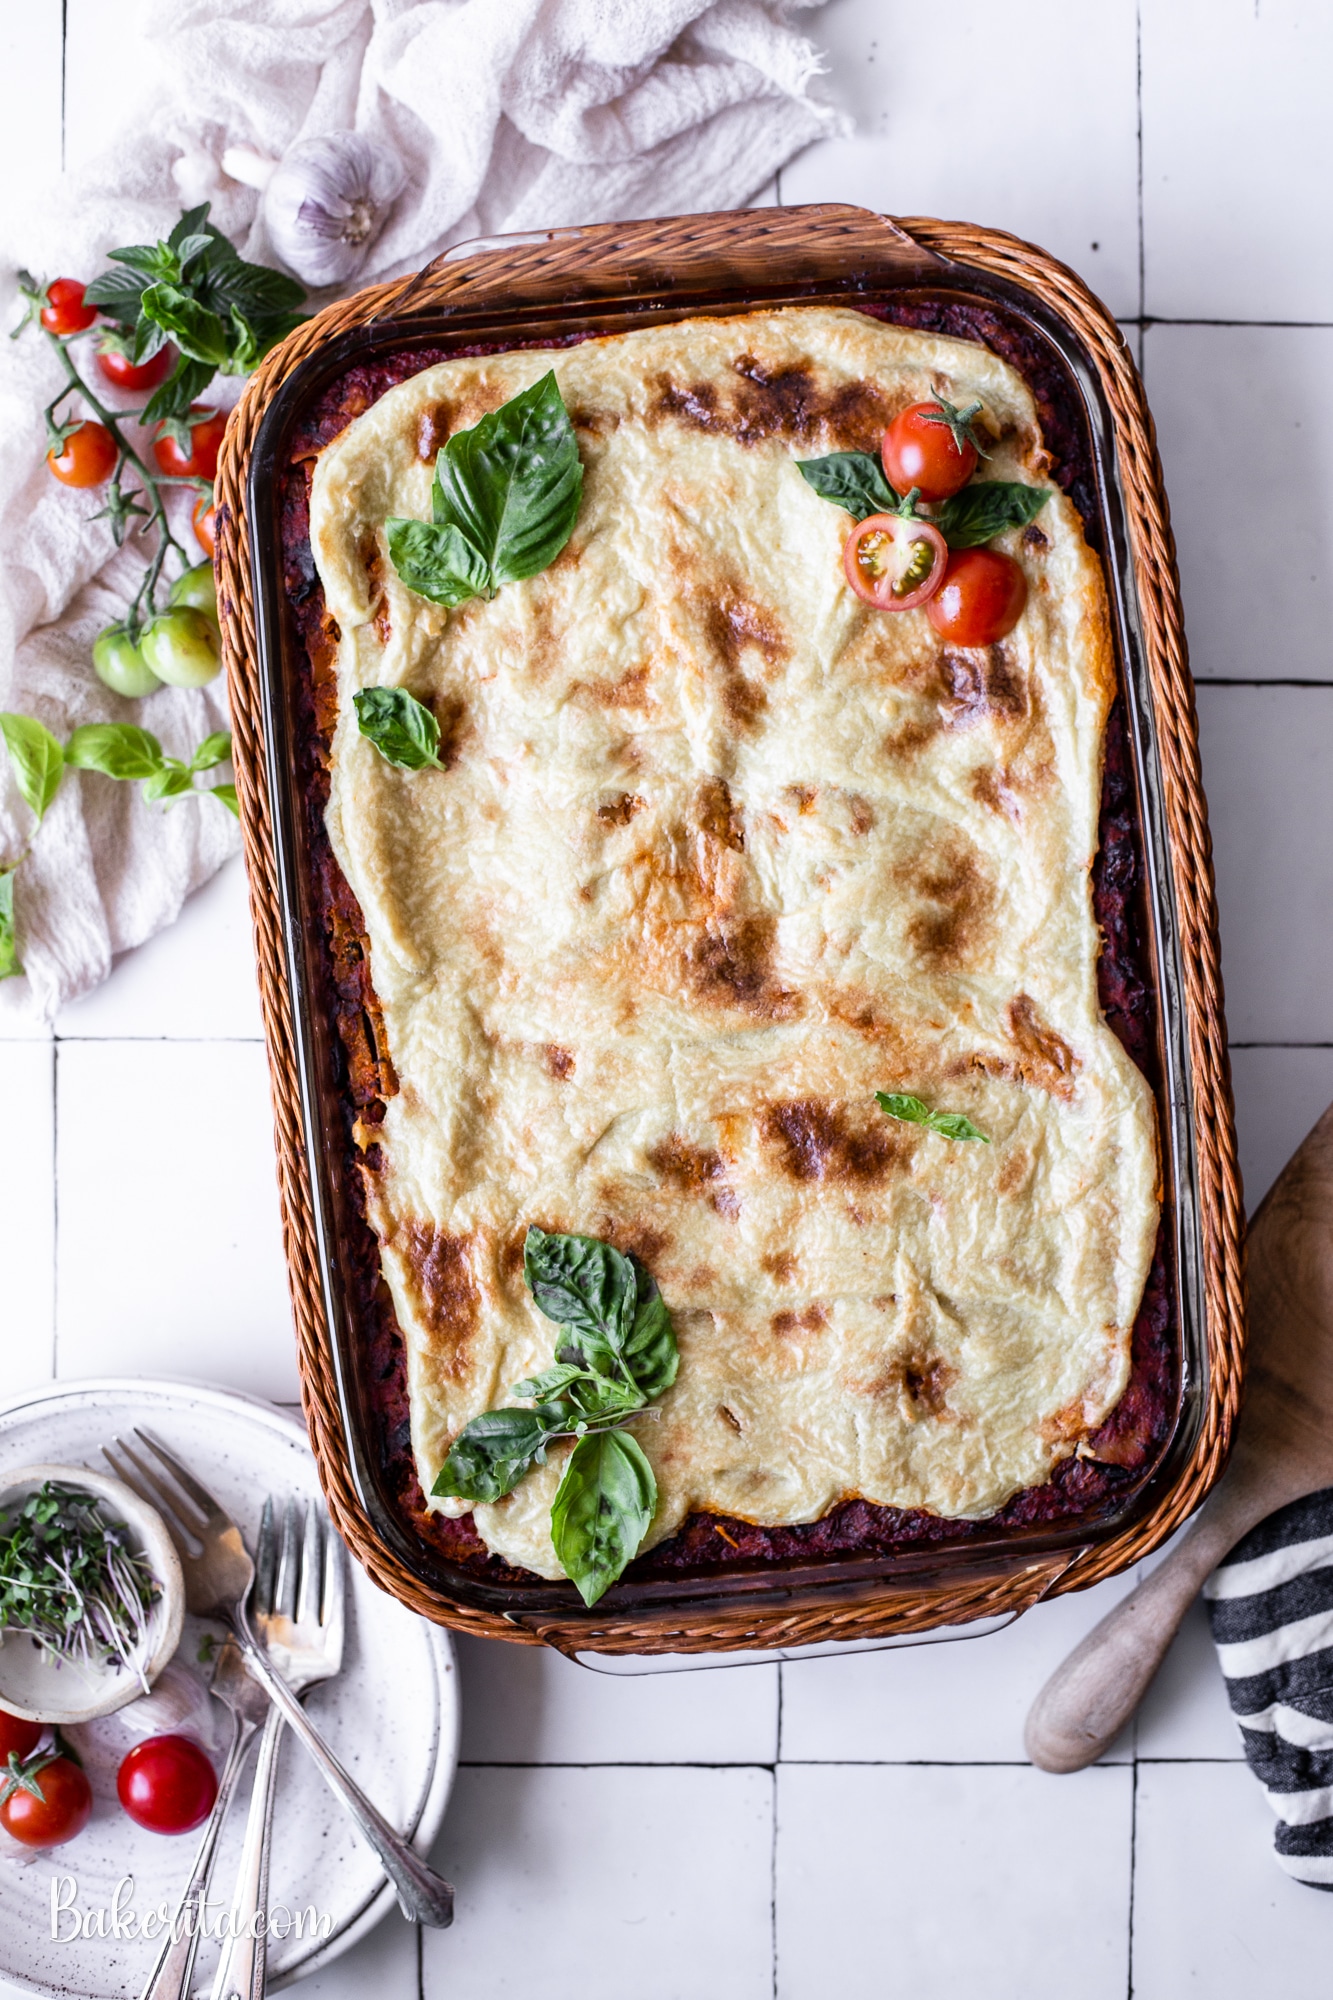 This is the BEST Vegan Lasagna! It's layered with vegan almond ricotta, mushroom tempeh marinara sauce, and topped with a simple vegan mozzarella cheese that bubbles and browns. It's easy to make gluten-free as well!